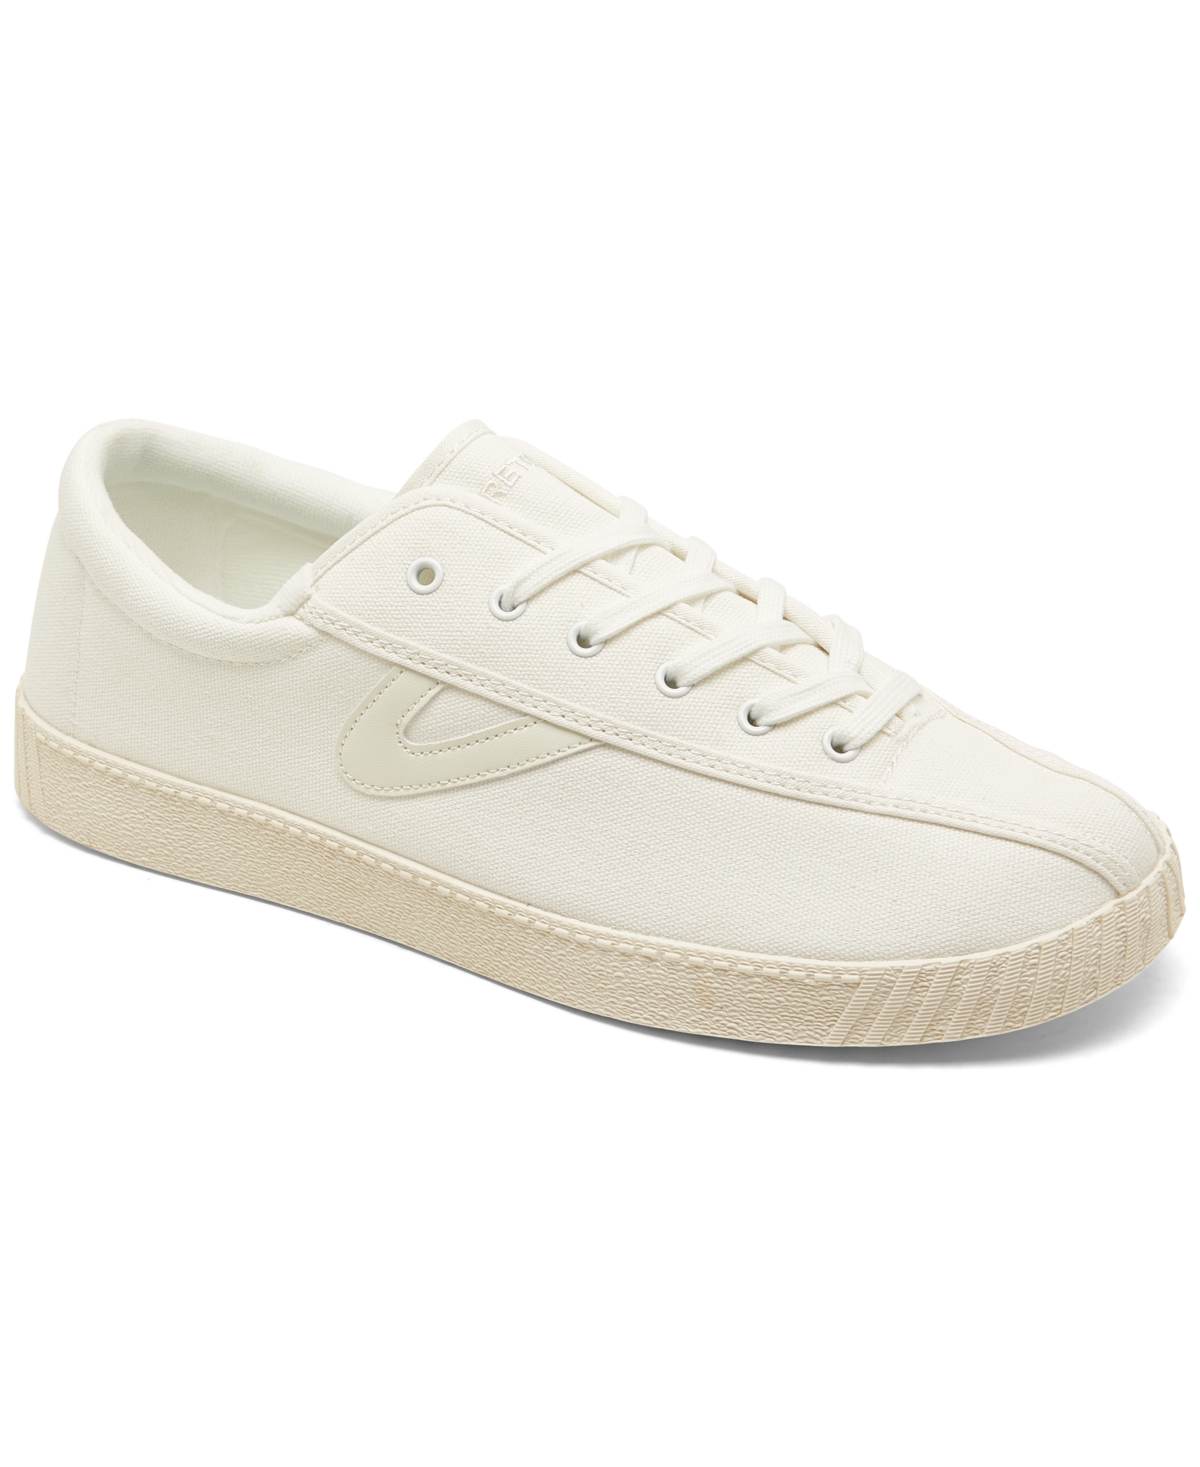 Tretorn Men's Nylite Plus Canvas Casual Sneakers From Finish Line In White